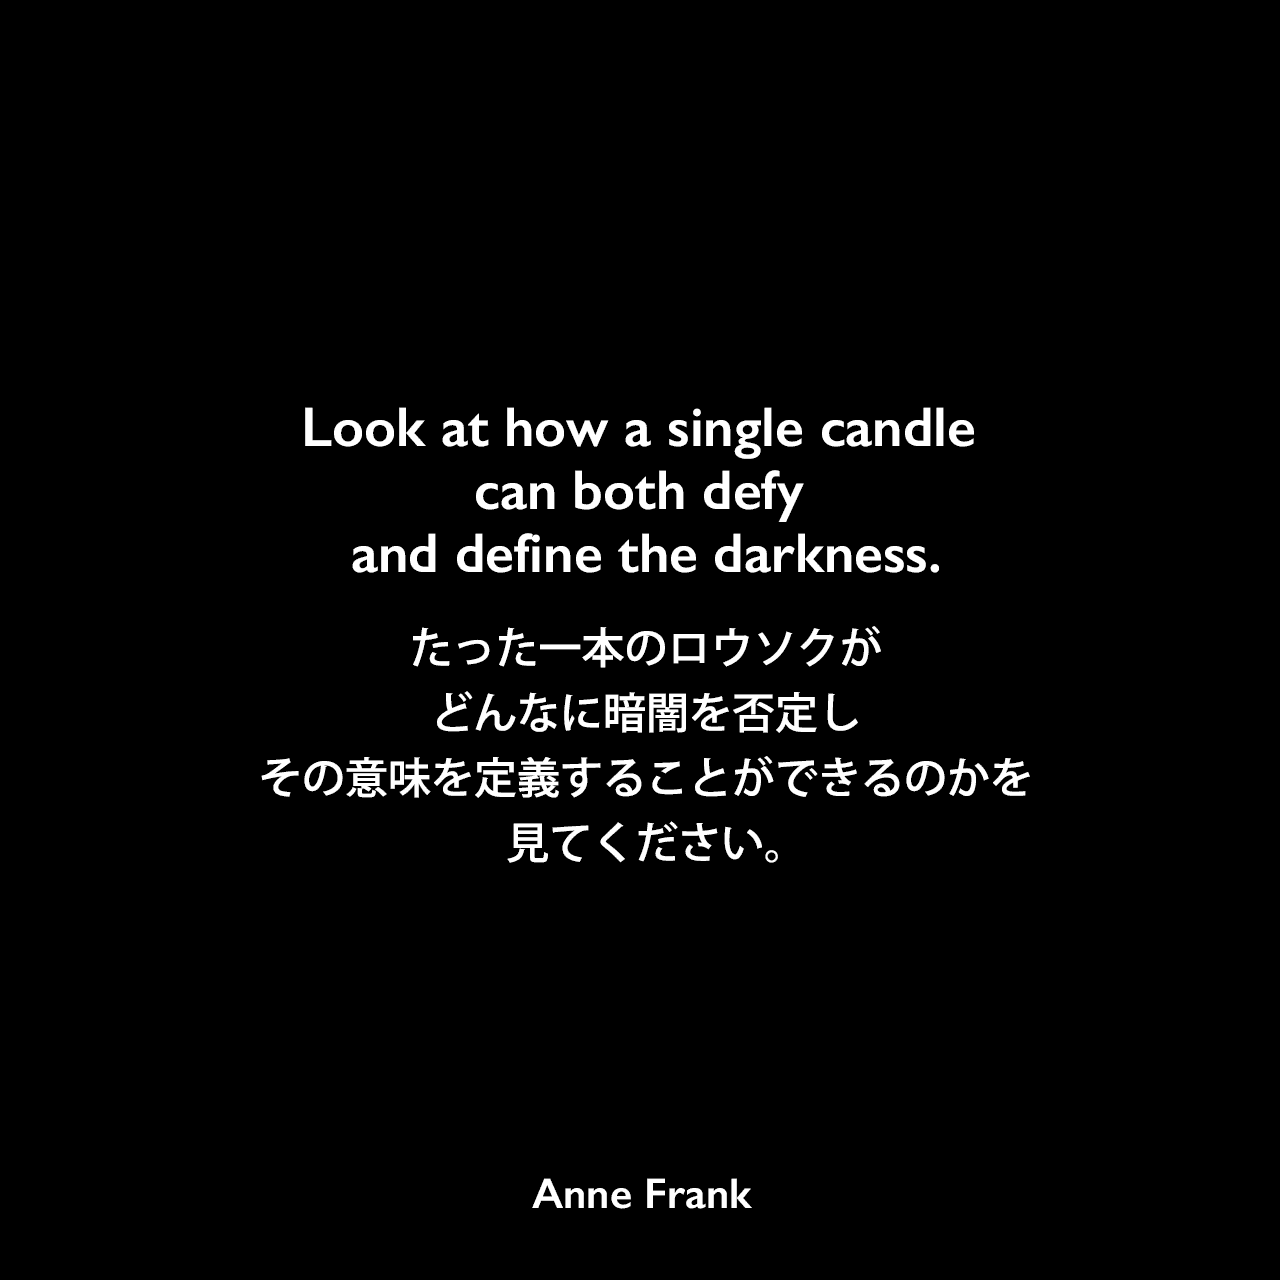 Look at how a single candle can both defy and define the darkness.たった一本のロウソクがどんなに暗闇を否定し、その意味を定義することができるのかを見てください。Anne Frank